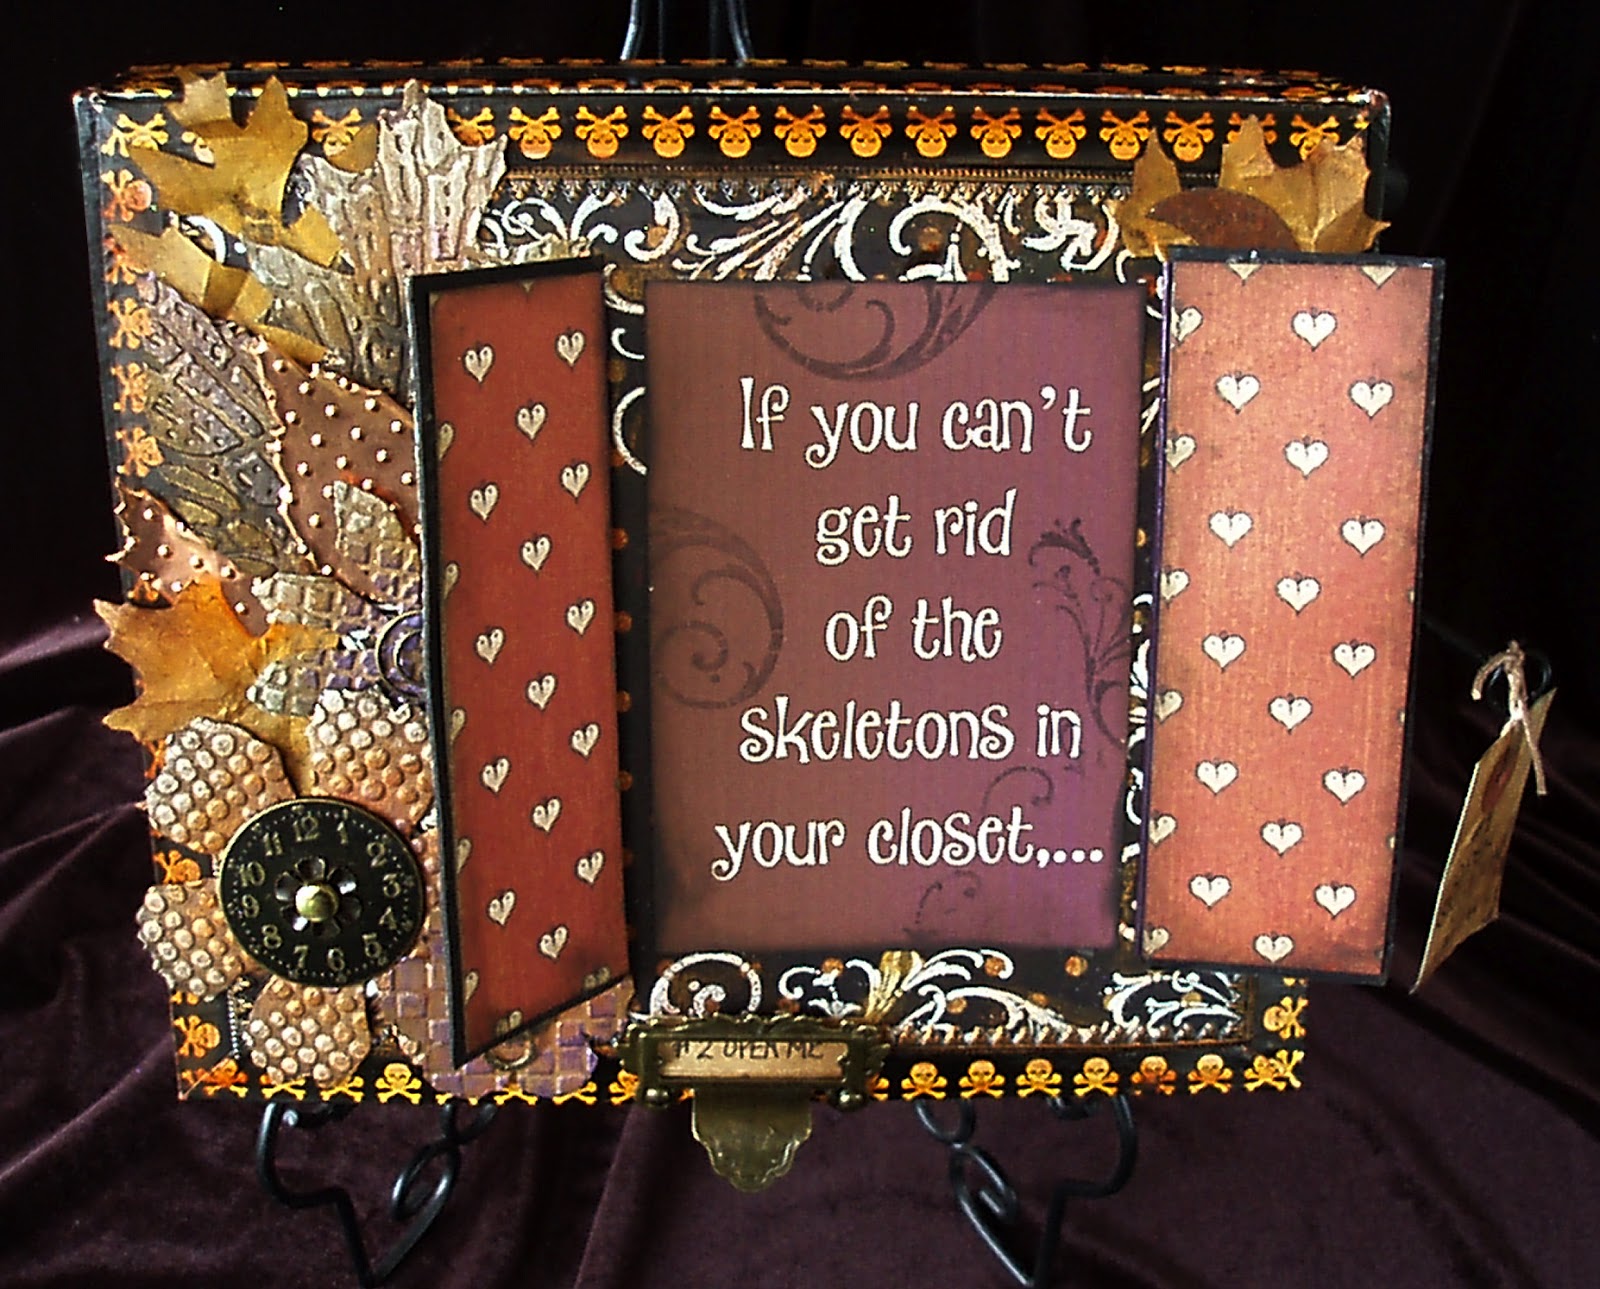 Skeletons In Your Closet Quotes. QuotesGram